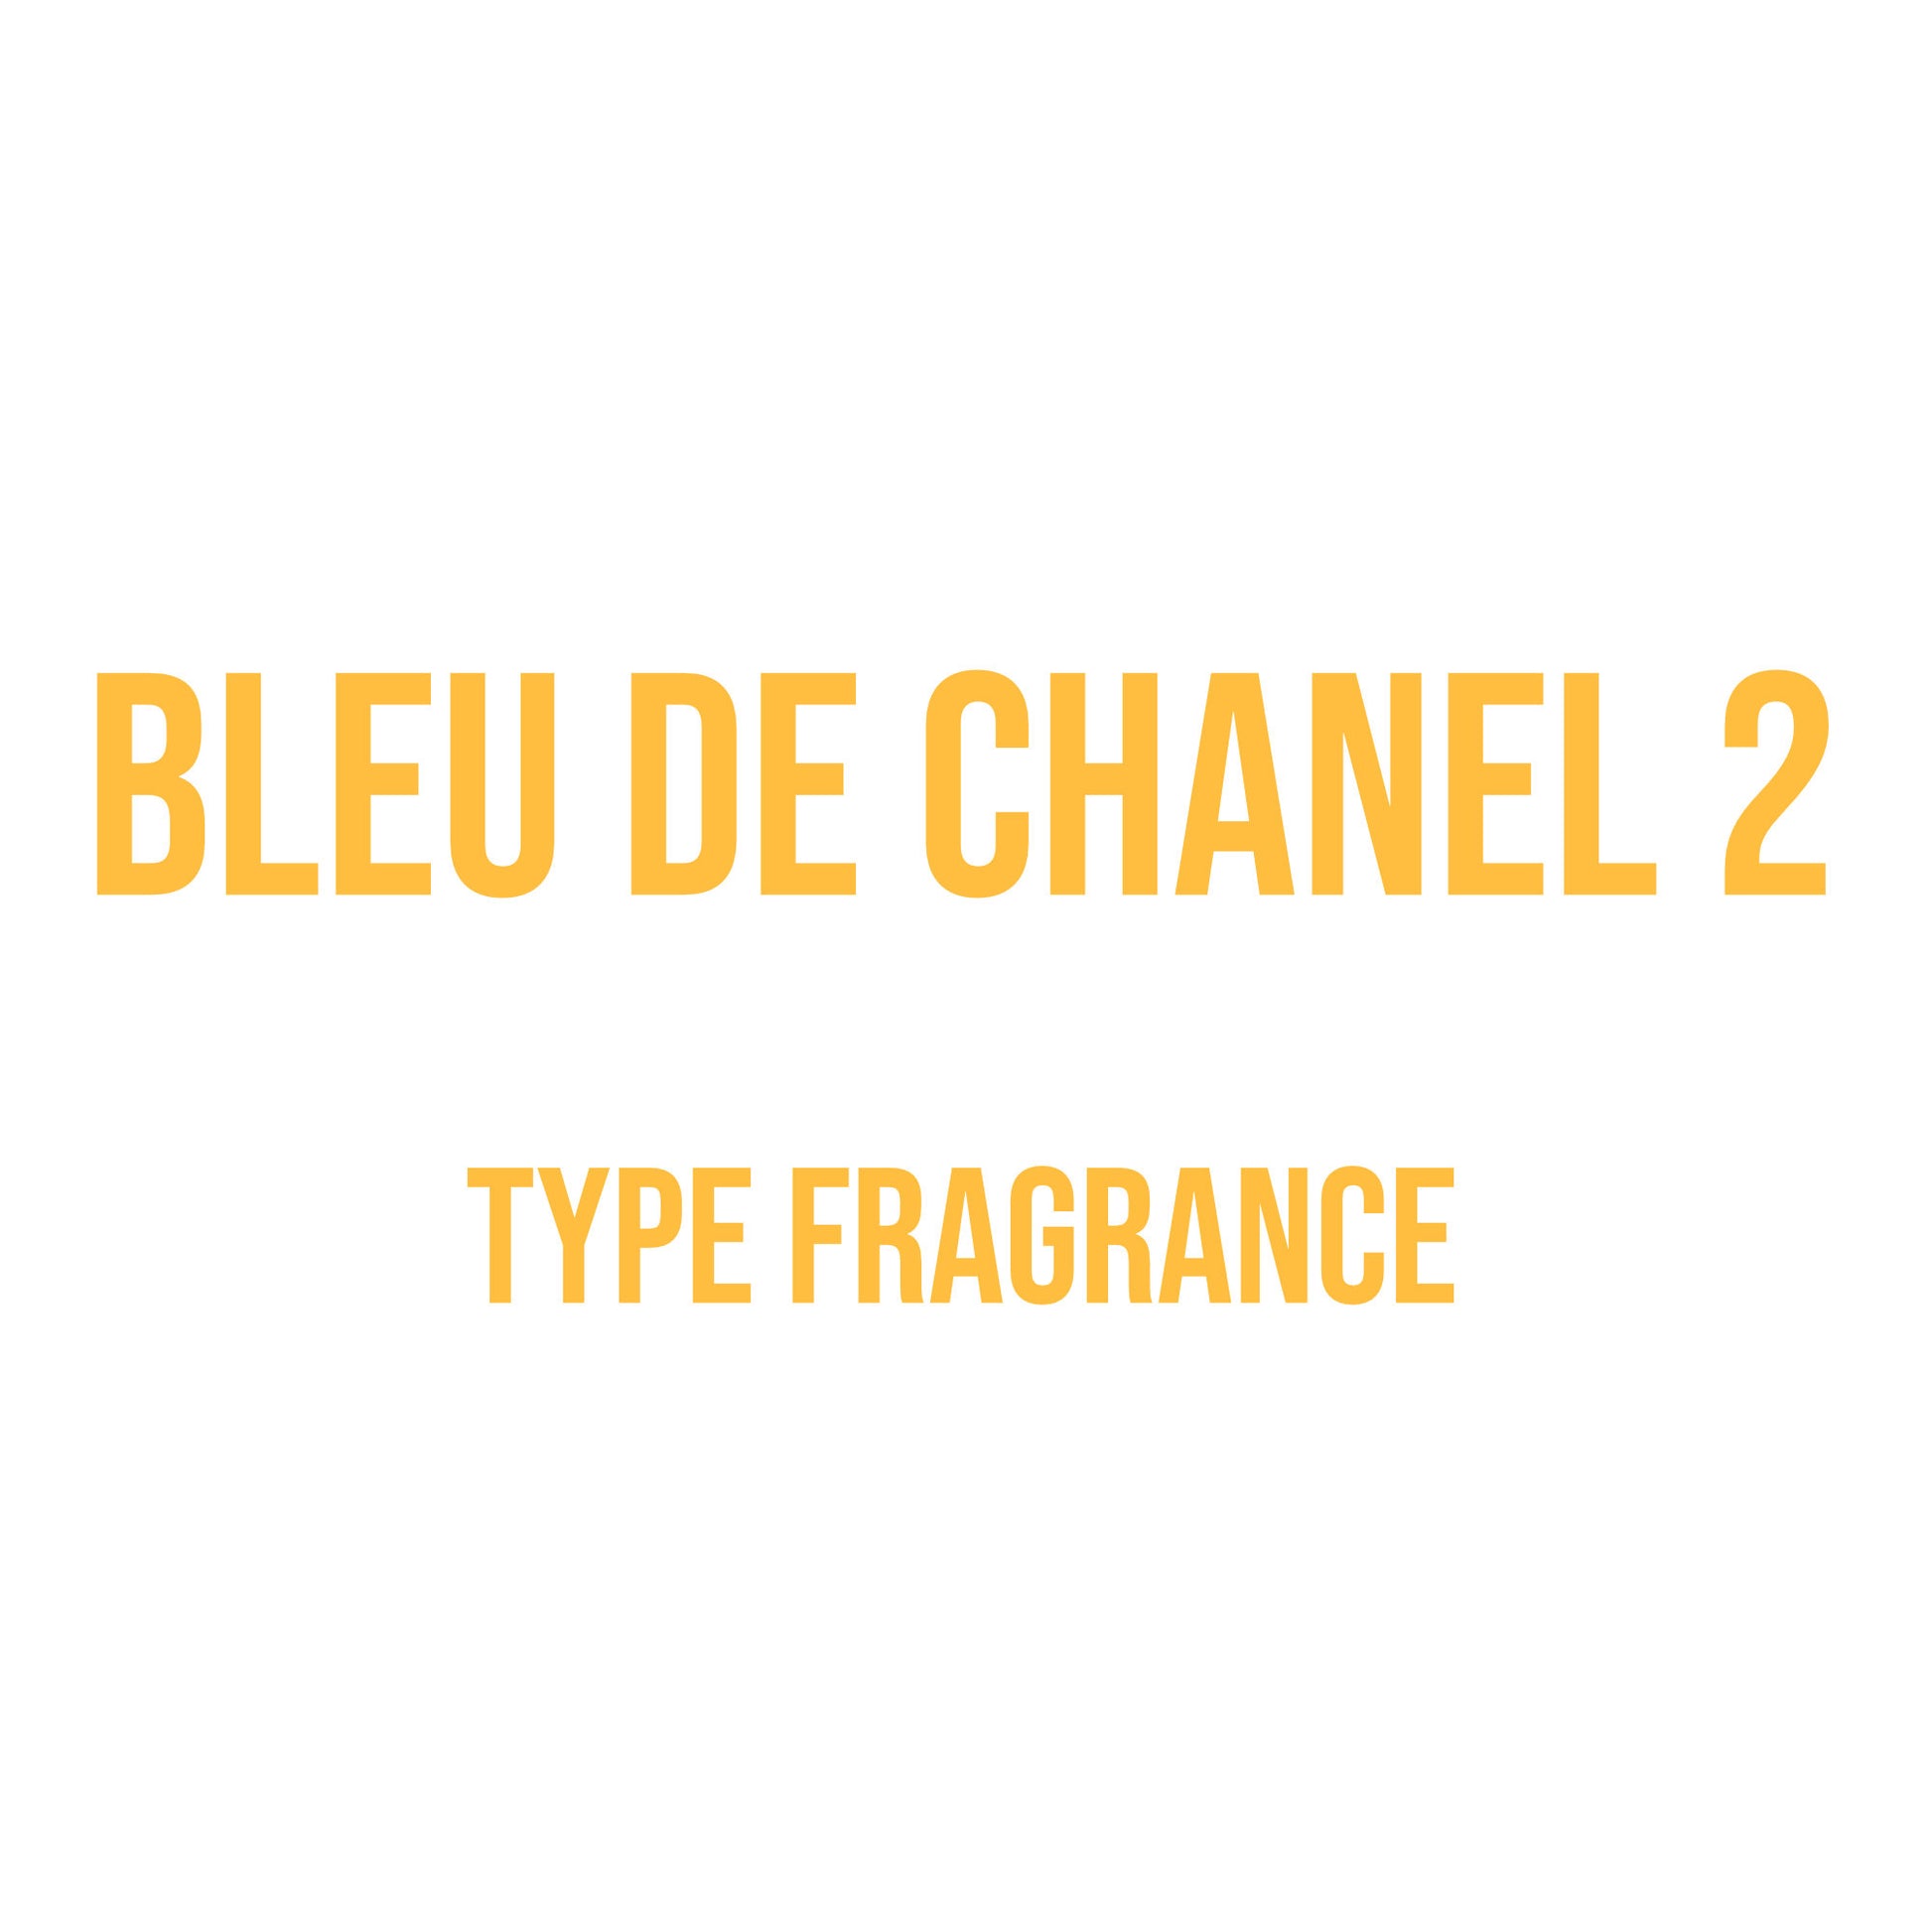 Bleu de Chanel 2 Type Fragrance  Inspired by Chanel Type Scents